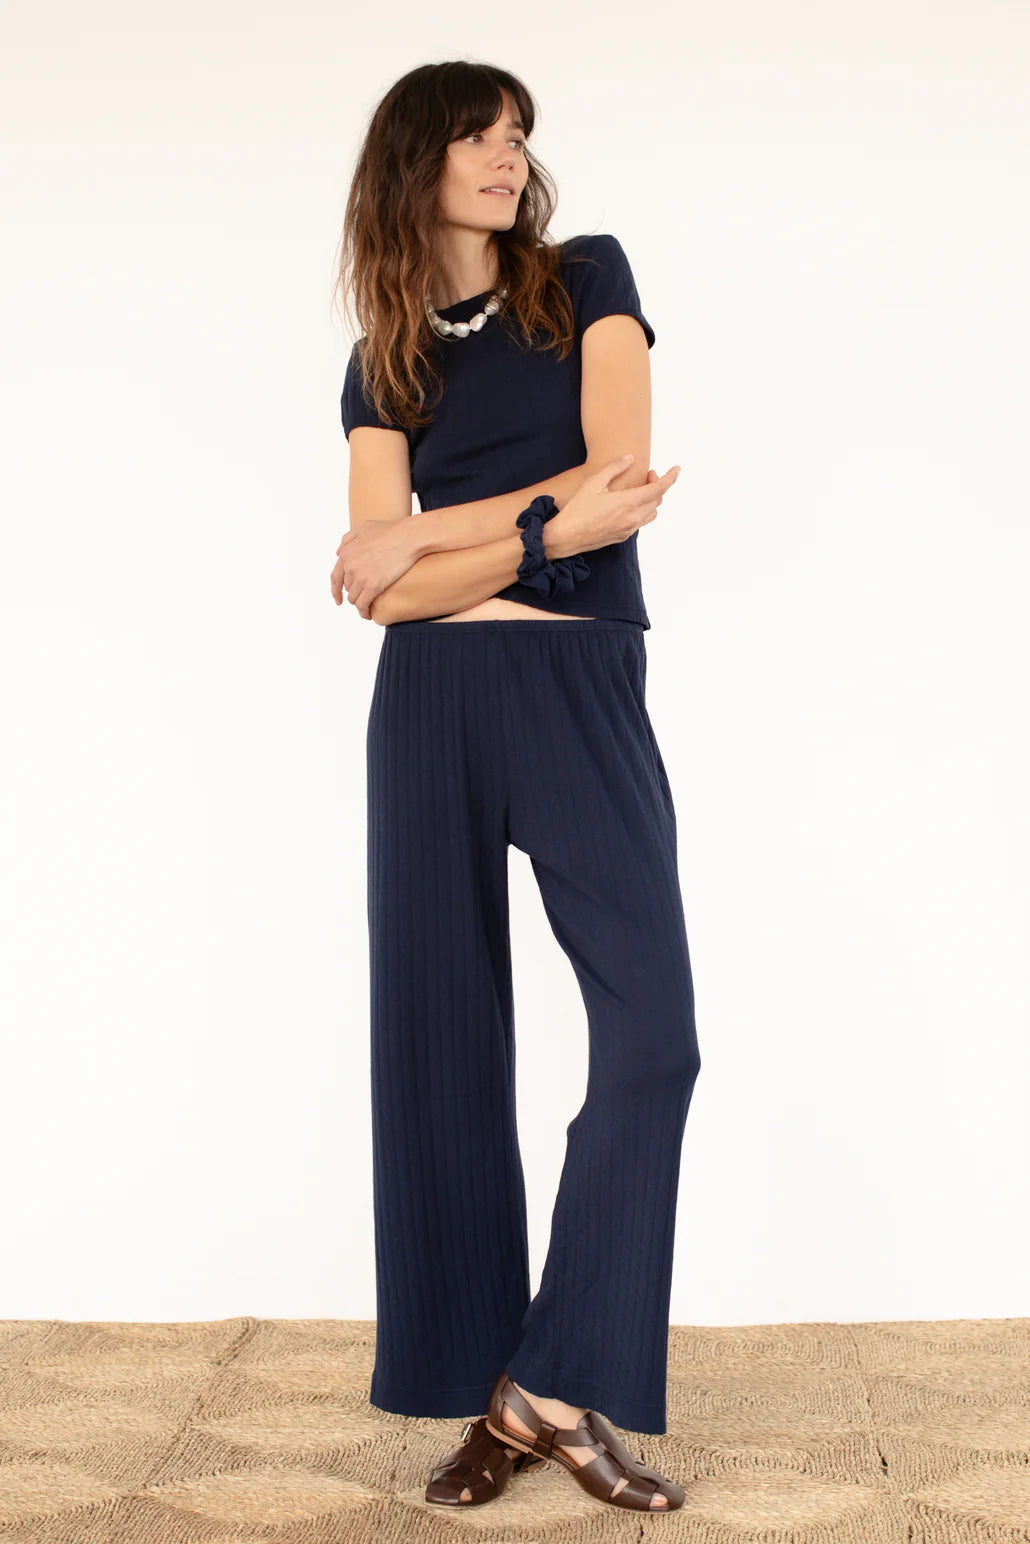 DONNI. The Pointelle Simple Crop Pant